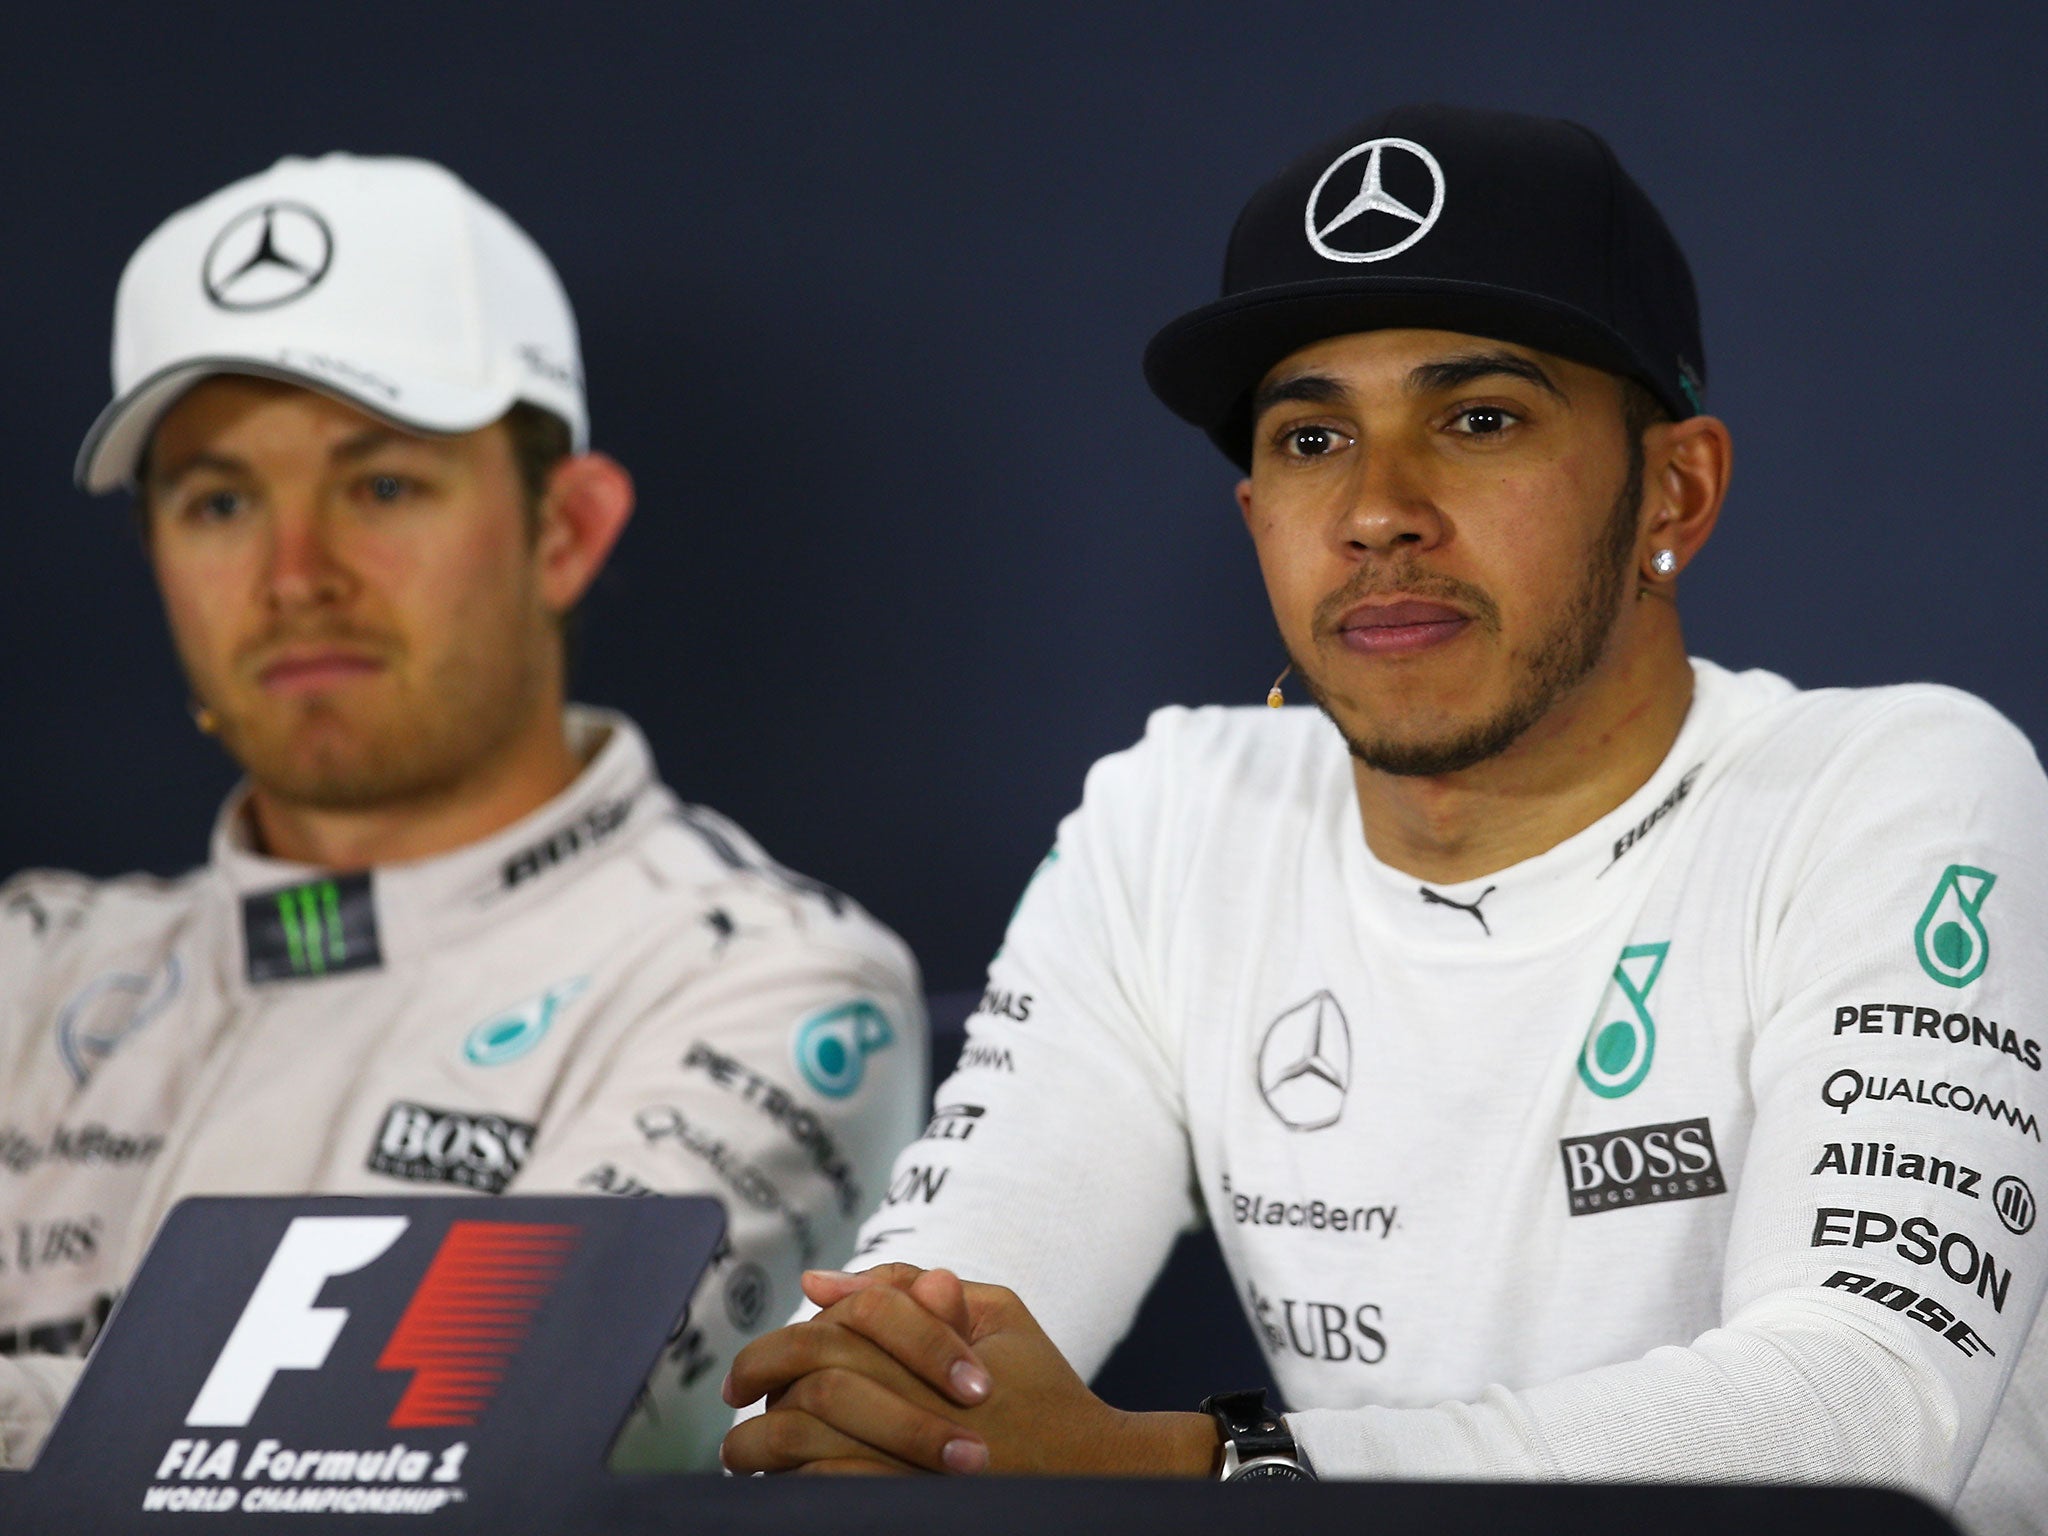 Nico Rosberg accused Lewis Hamilton of deliberately slowing him down in China